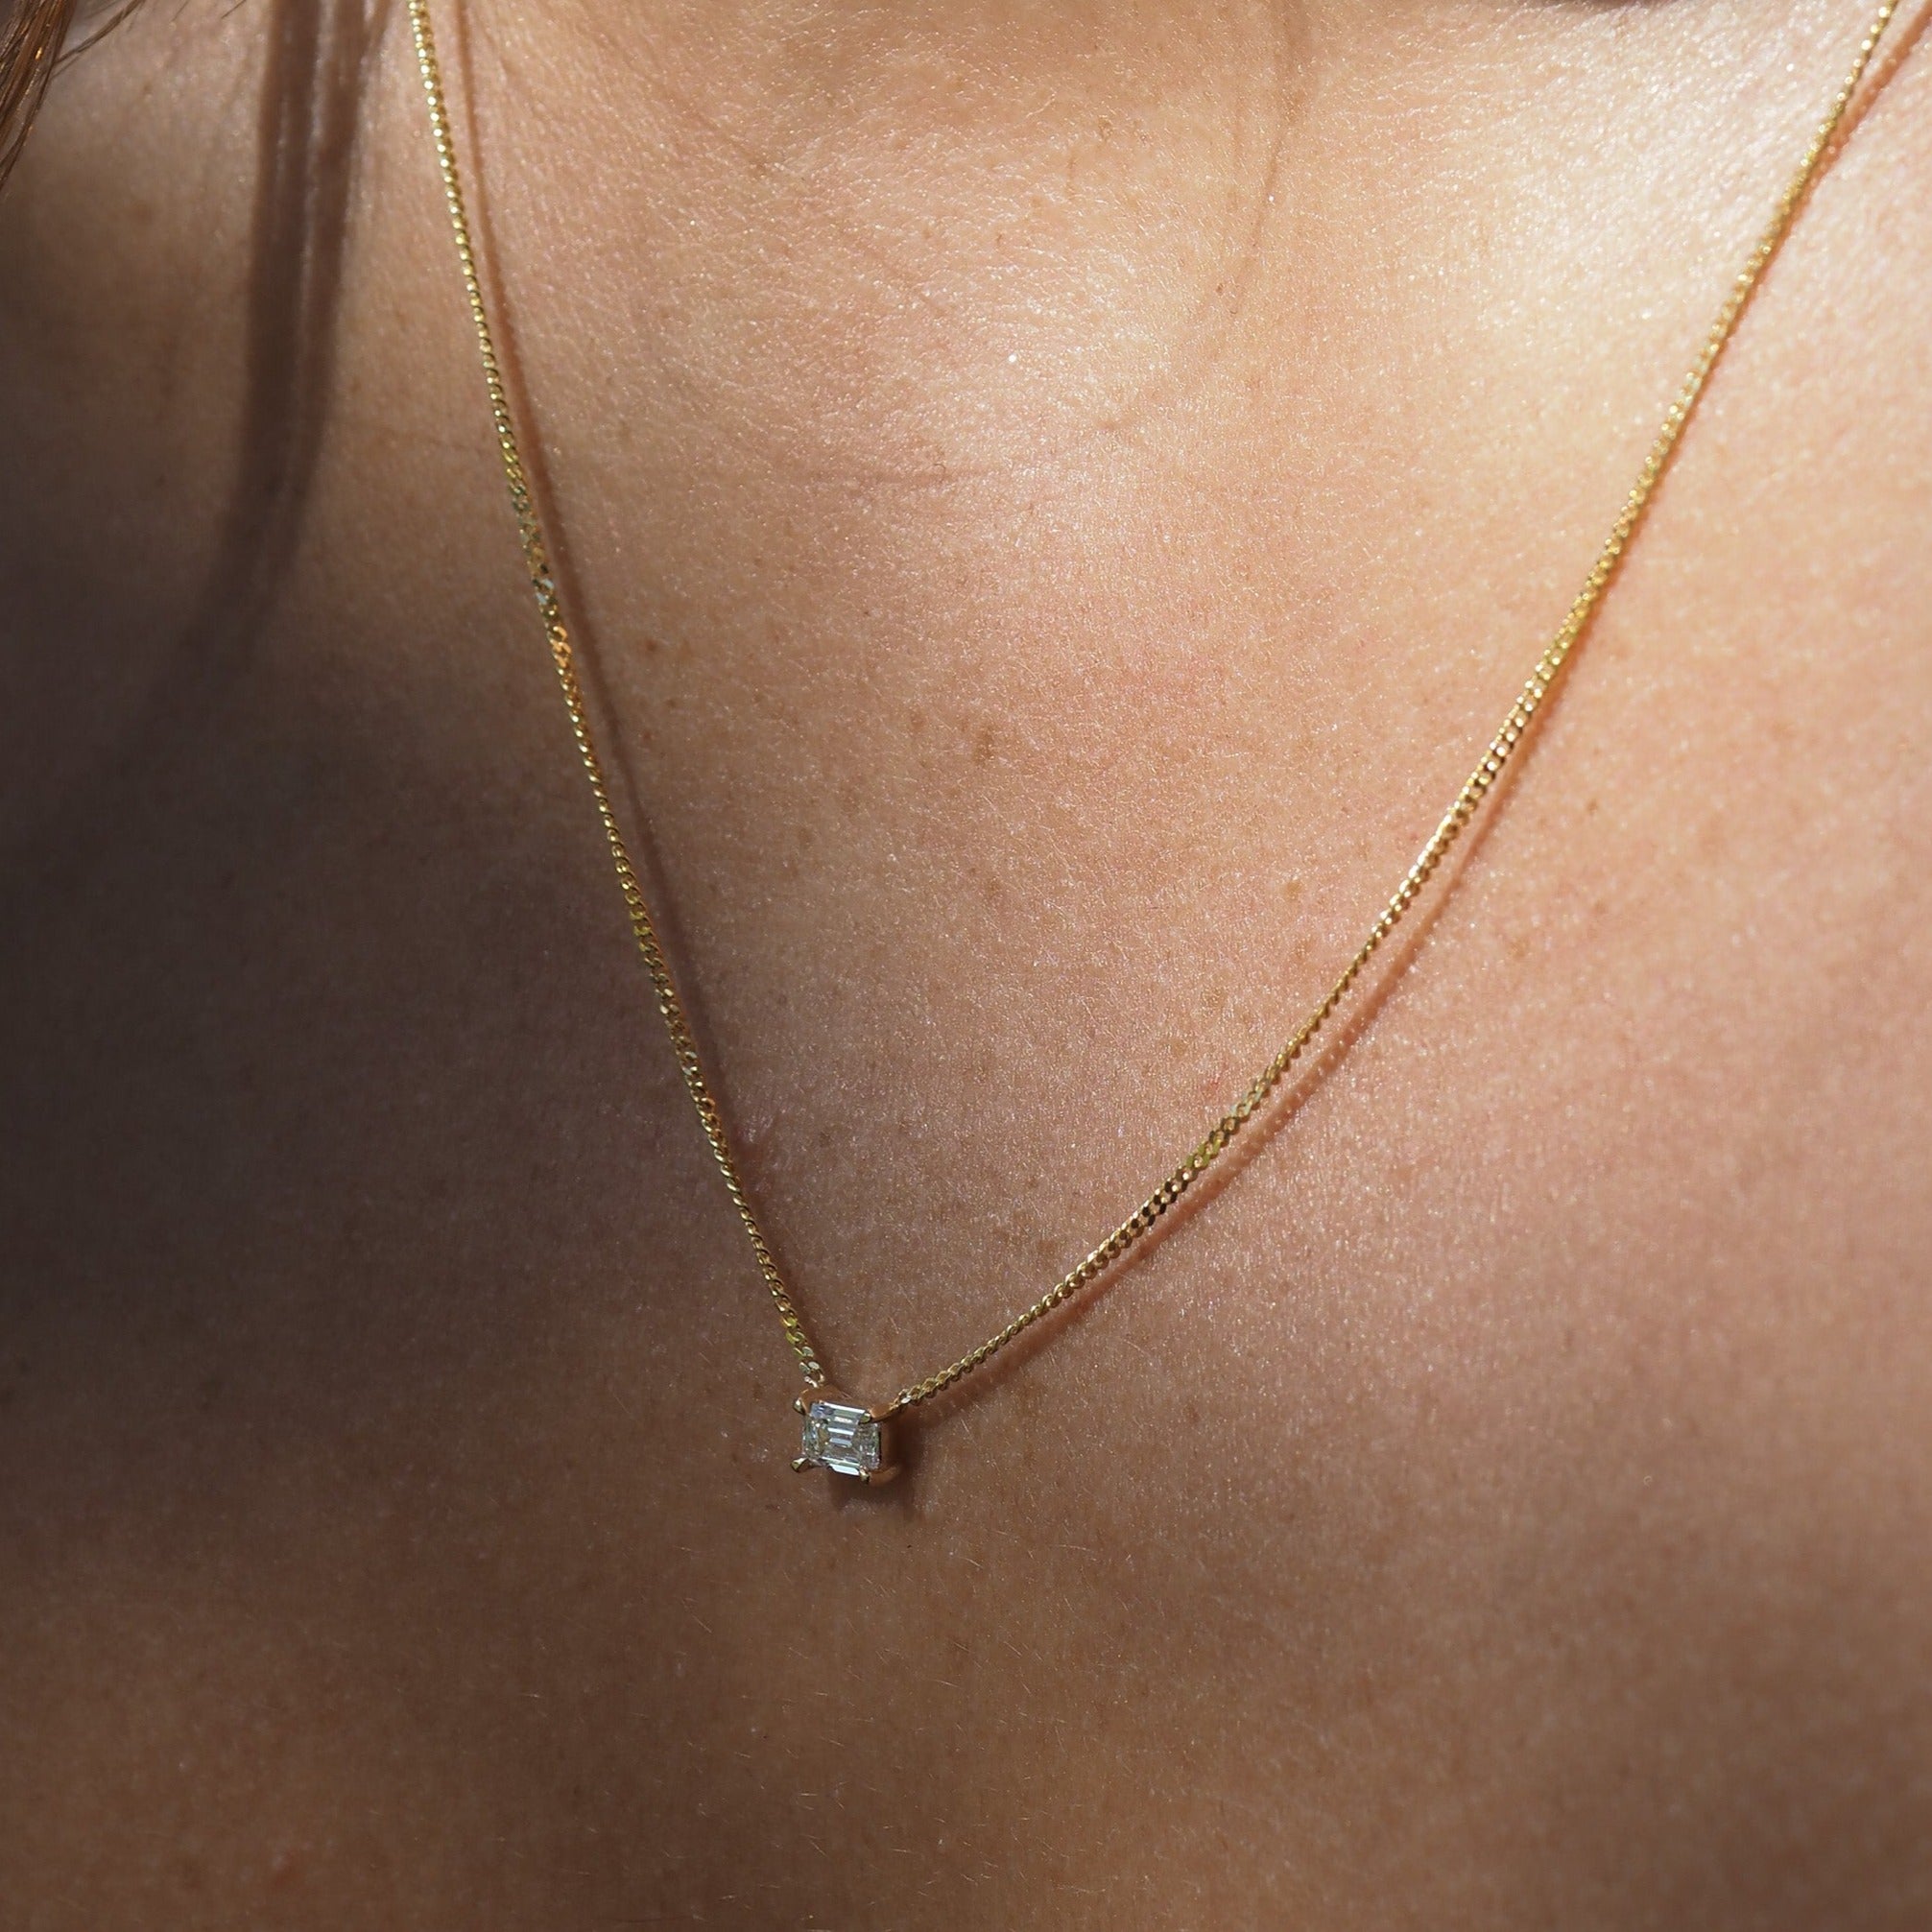 Elegant Emerald diamond necklace featured on yellow gold chain. 